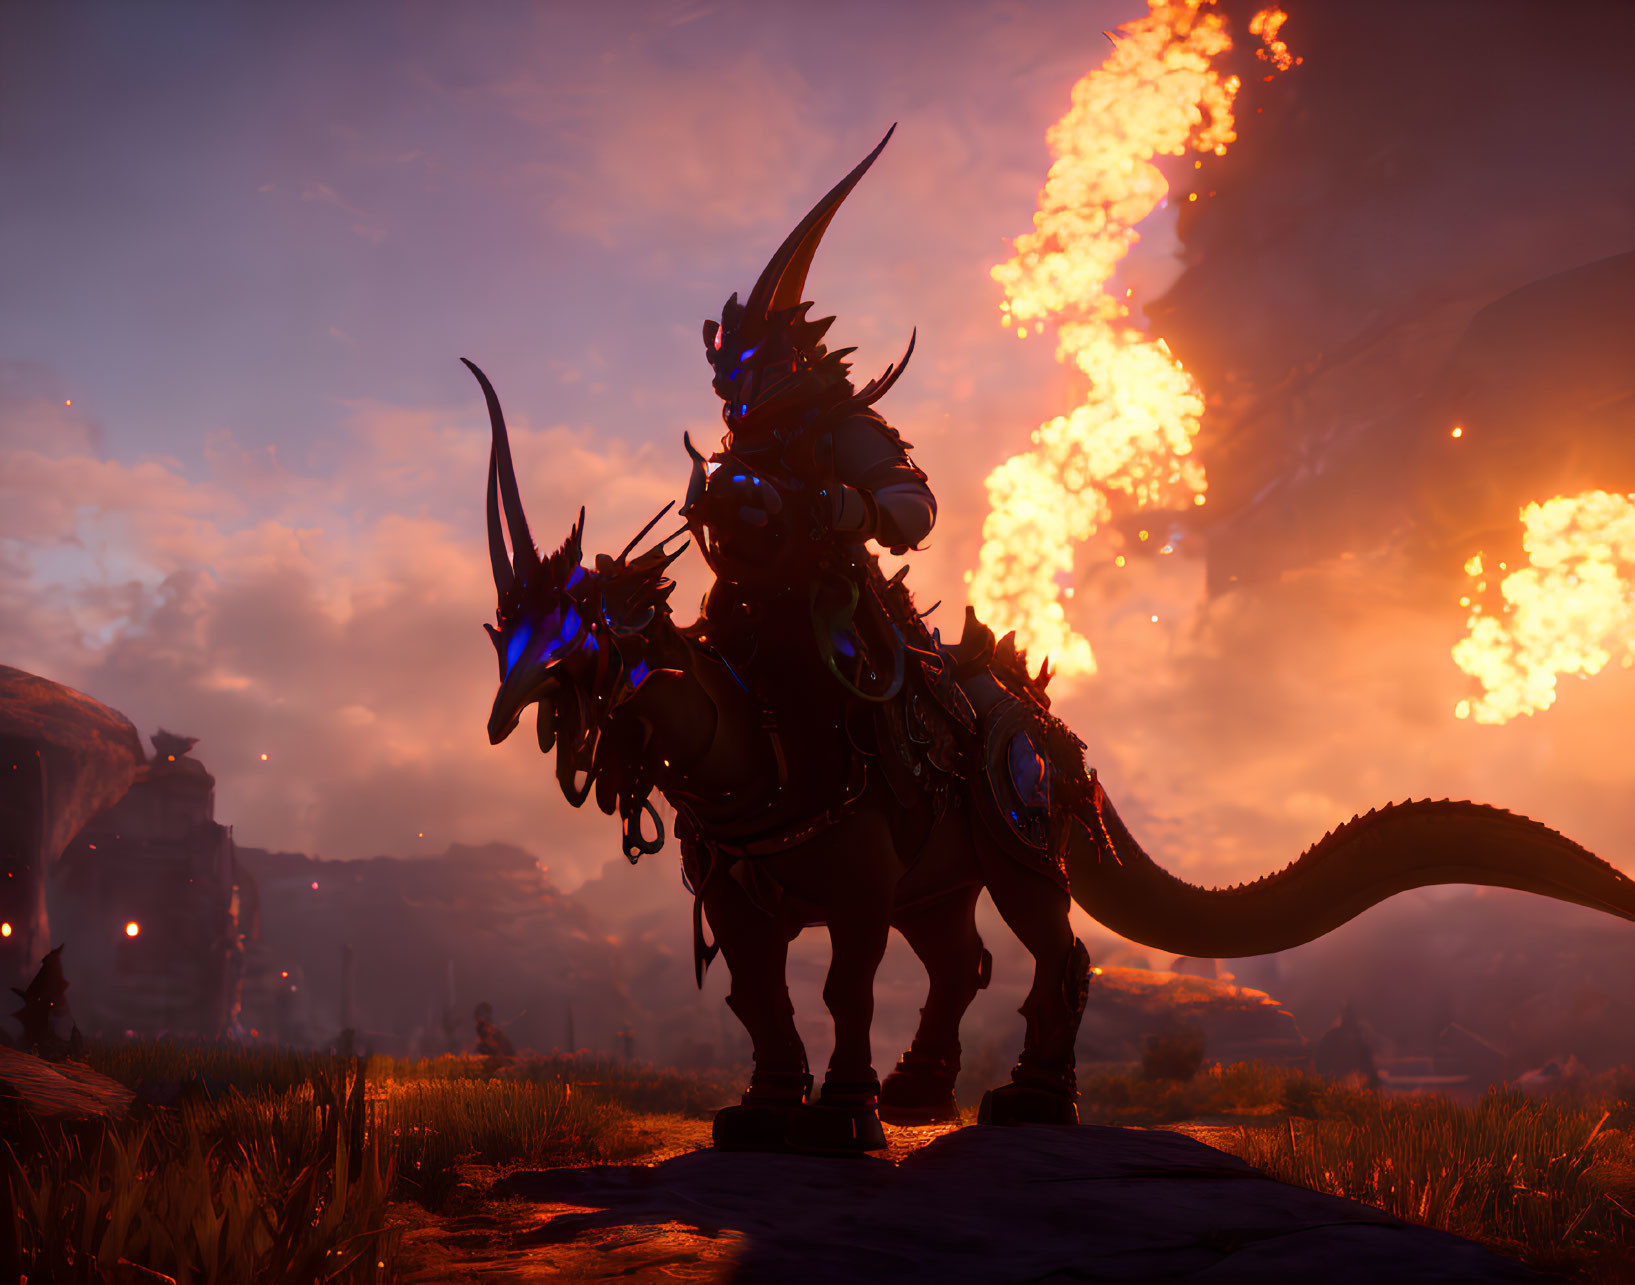 Armored dragon in fiery dusk landscape with floating embers